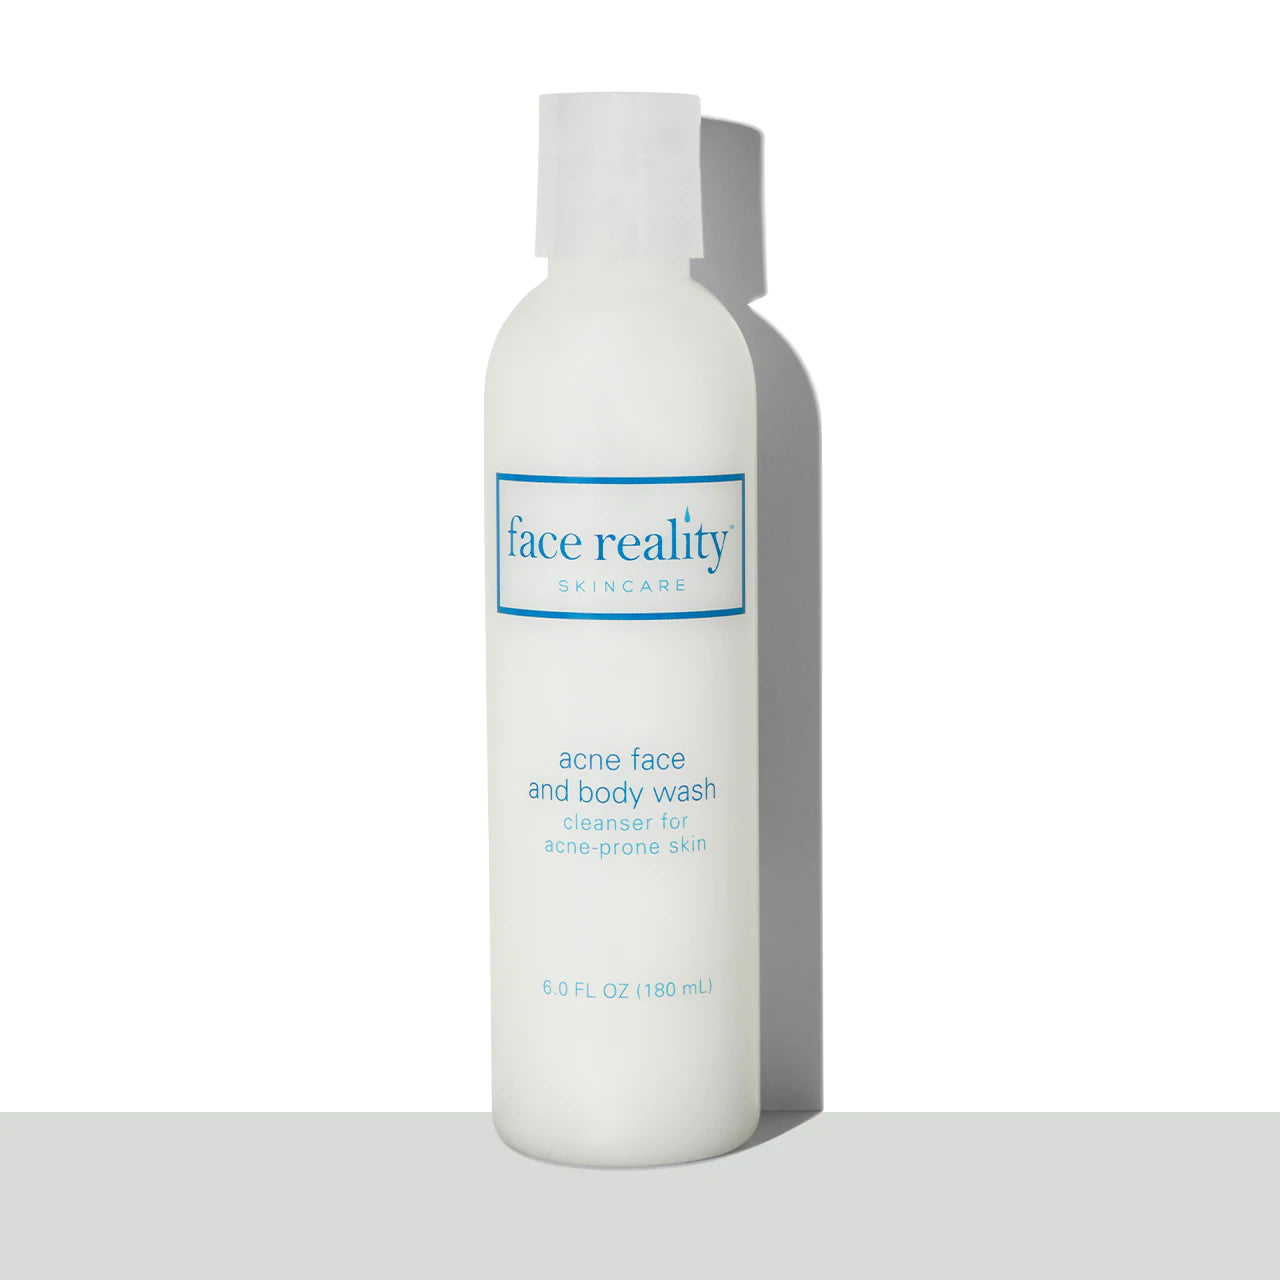 Face Reality Acne Face & Body Wash